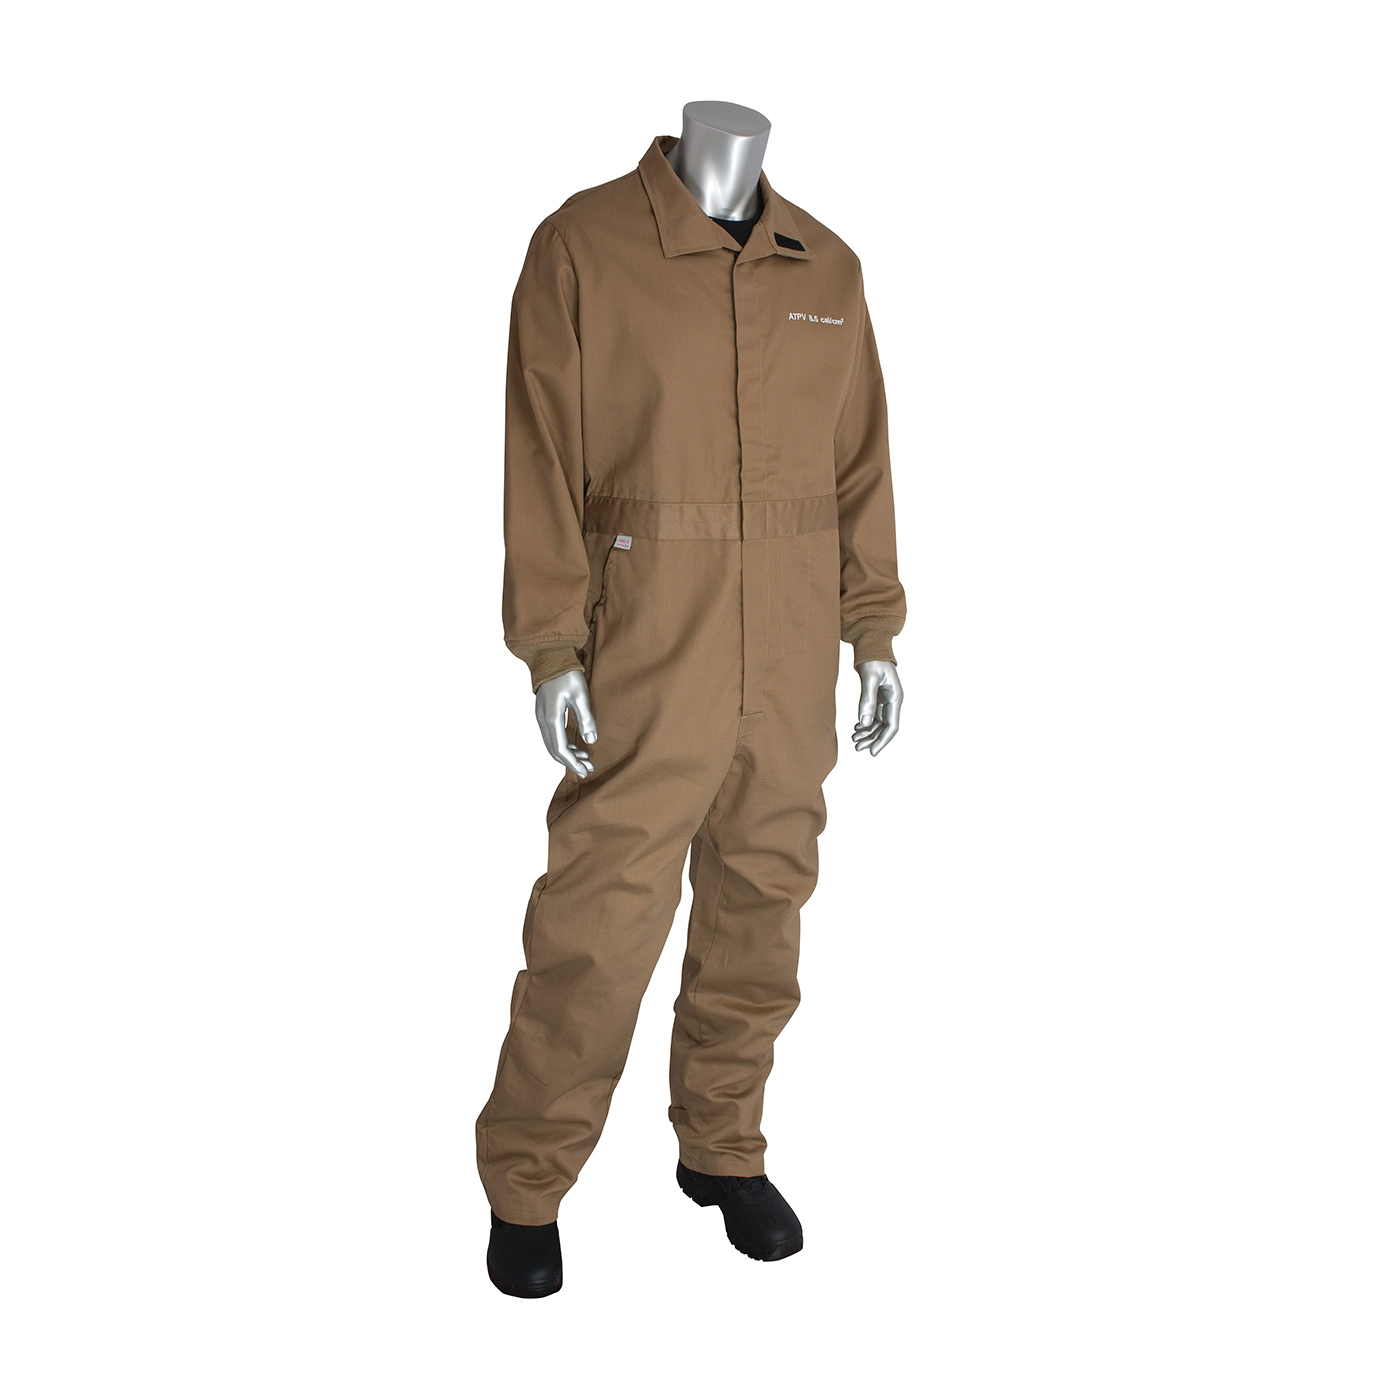 PIP® 9100-2100D/3X Flame Resistant Coverall With Vented Back, 3XL, Khaki, 90% Cotton/10% Nylon/FR Twill Weave, 56 to 58 in Chest, 32 in L Inseam